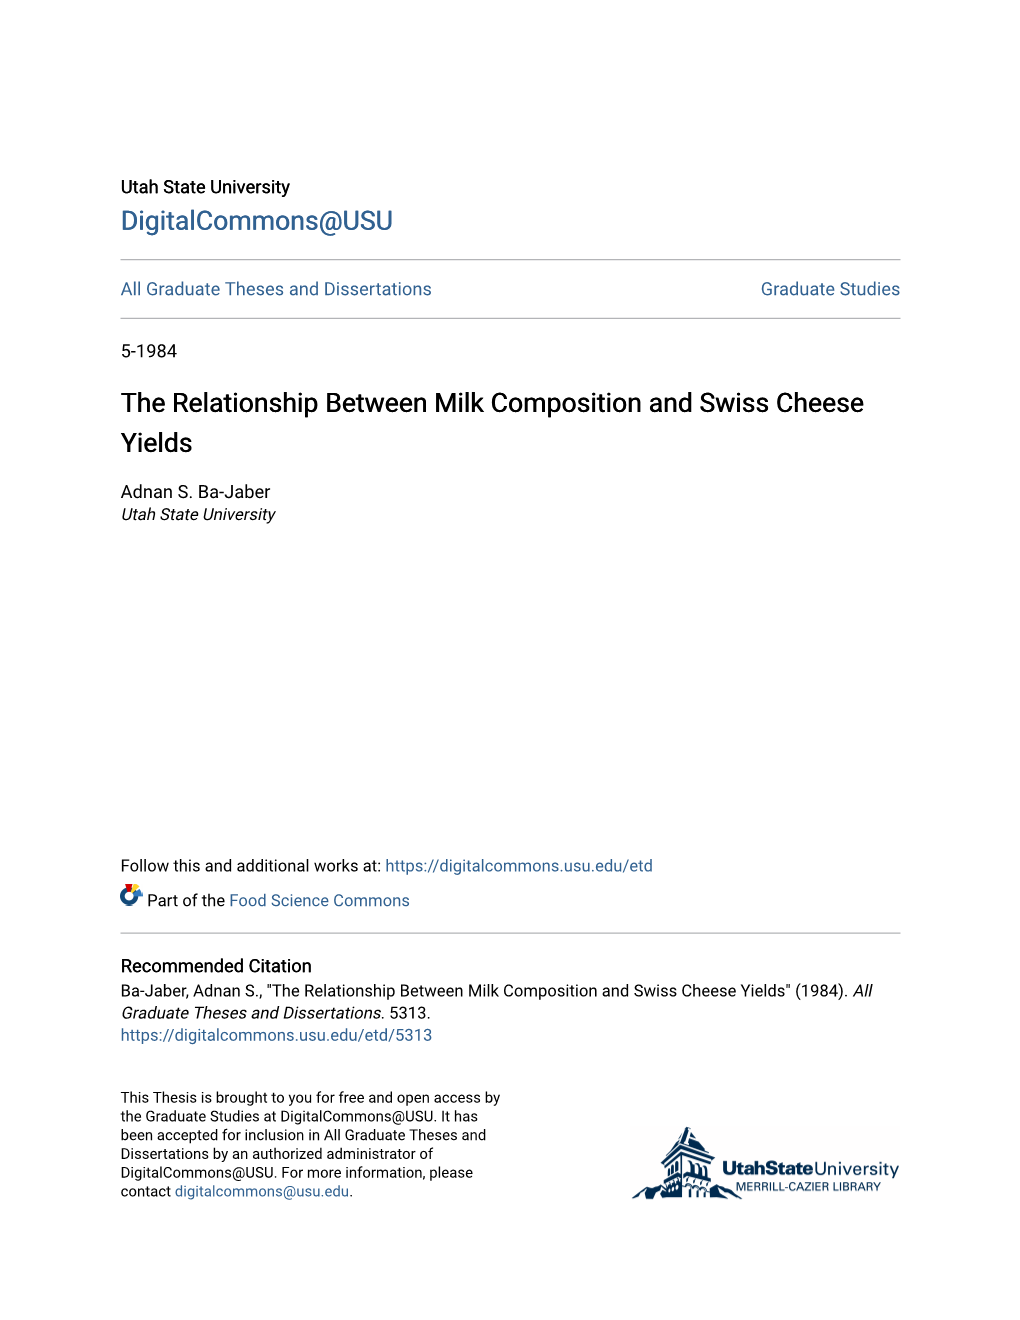 The Relationship Between Milk Composition and Swiss Cheese Yields